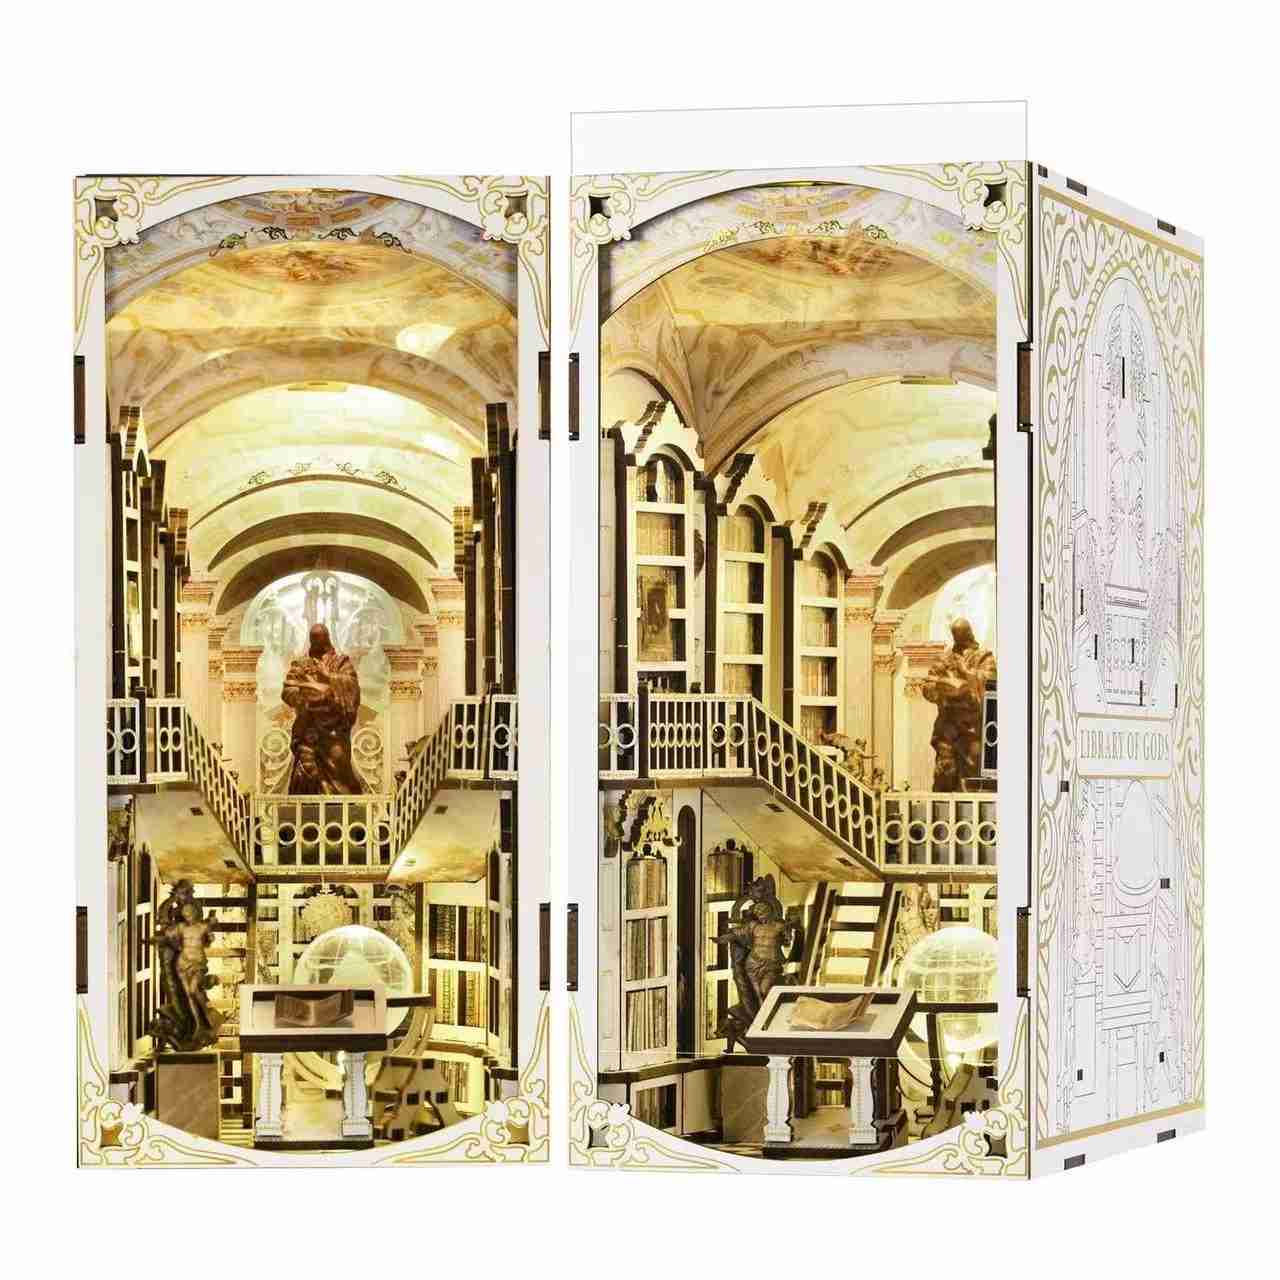 Library of Gods DIY Book Nook Kit, a miniature replica of the Admont Abbey library, featuring towering shelves filled with tiny books, a huge statue of a god, a crystal globe, and seven vaulted domes with frescoes. Perfect for bookshelf decor, and dollhouse collectors, or a gift for art lovers, history fans and DIY enthusiasts - right angle